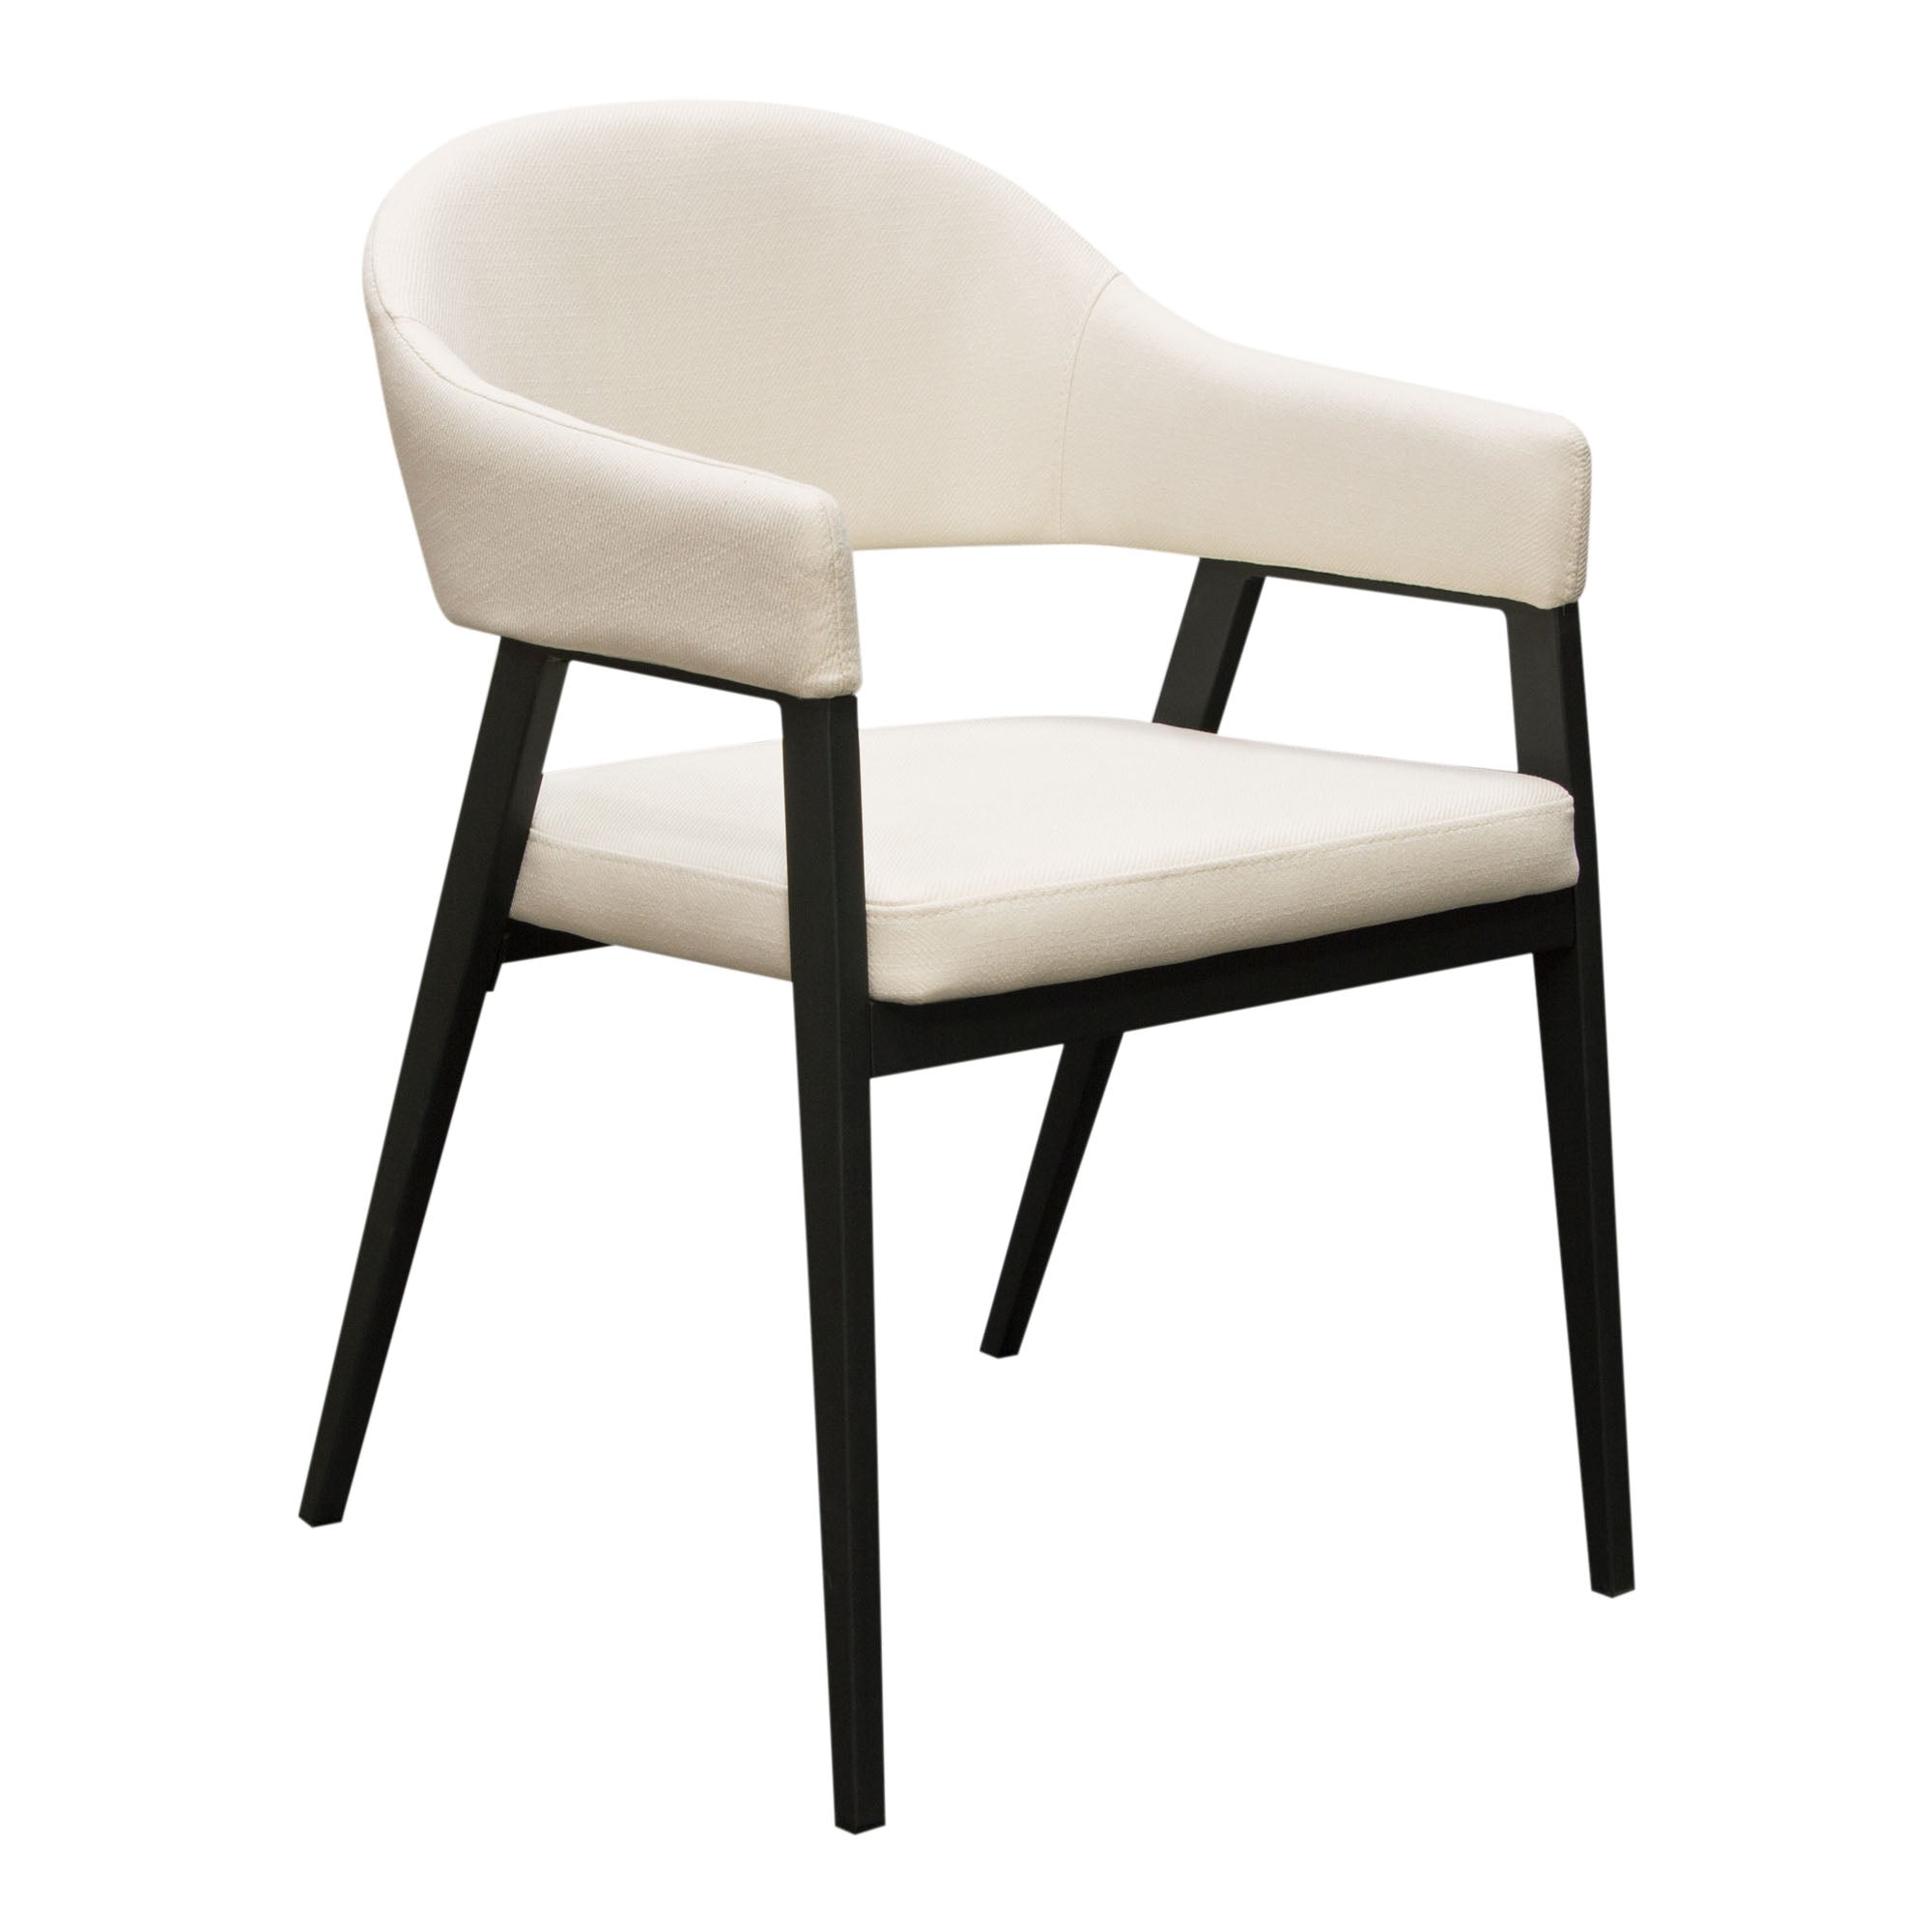 ADELE DINING CHAIR - SET OF 2